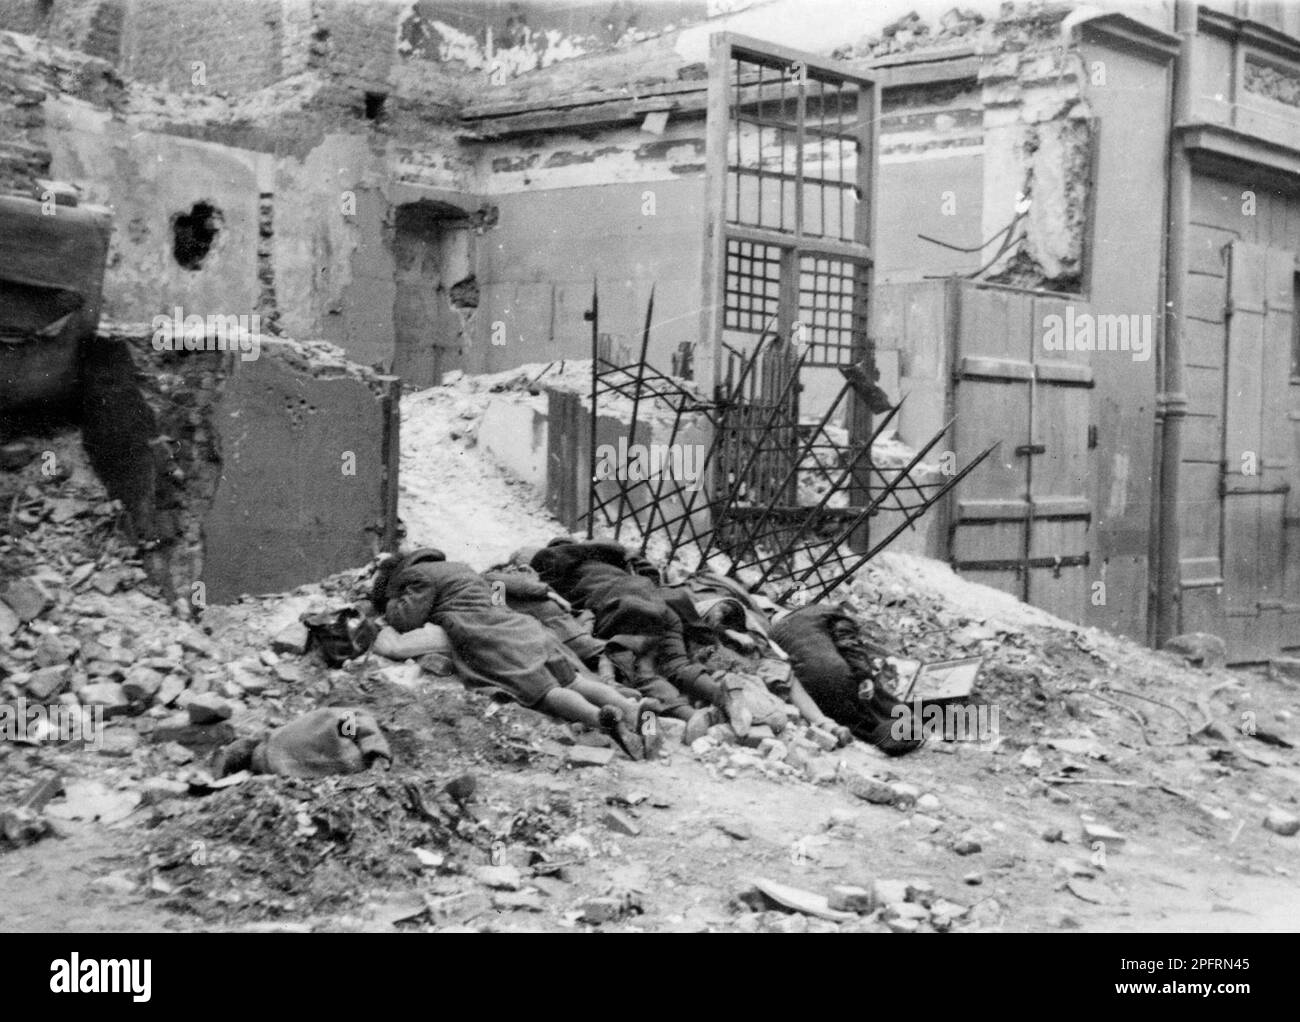 In January 1943 the nazis arrived to round up the Jews of the Warsaw Ghetto  The Jews, resolved to fight it out, took on the SS with homemade and primitive weapons. The defenders were executed or deported and the Ghetto area was systematically demolished. This event is known as The Ghetto Uprising. This image shows the bodies of Jews executed after their capture. This image is from the German photographic record of the event, known as the Stroop report. Stock Photo